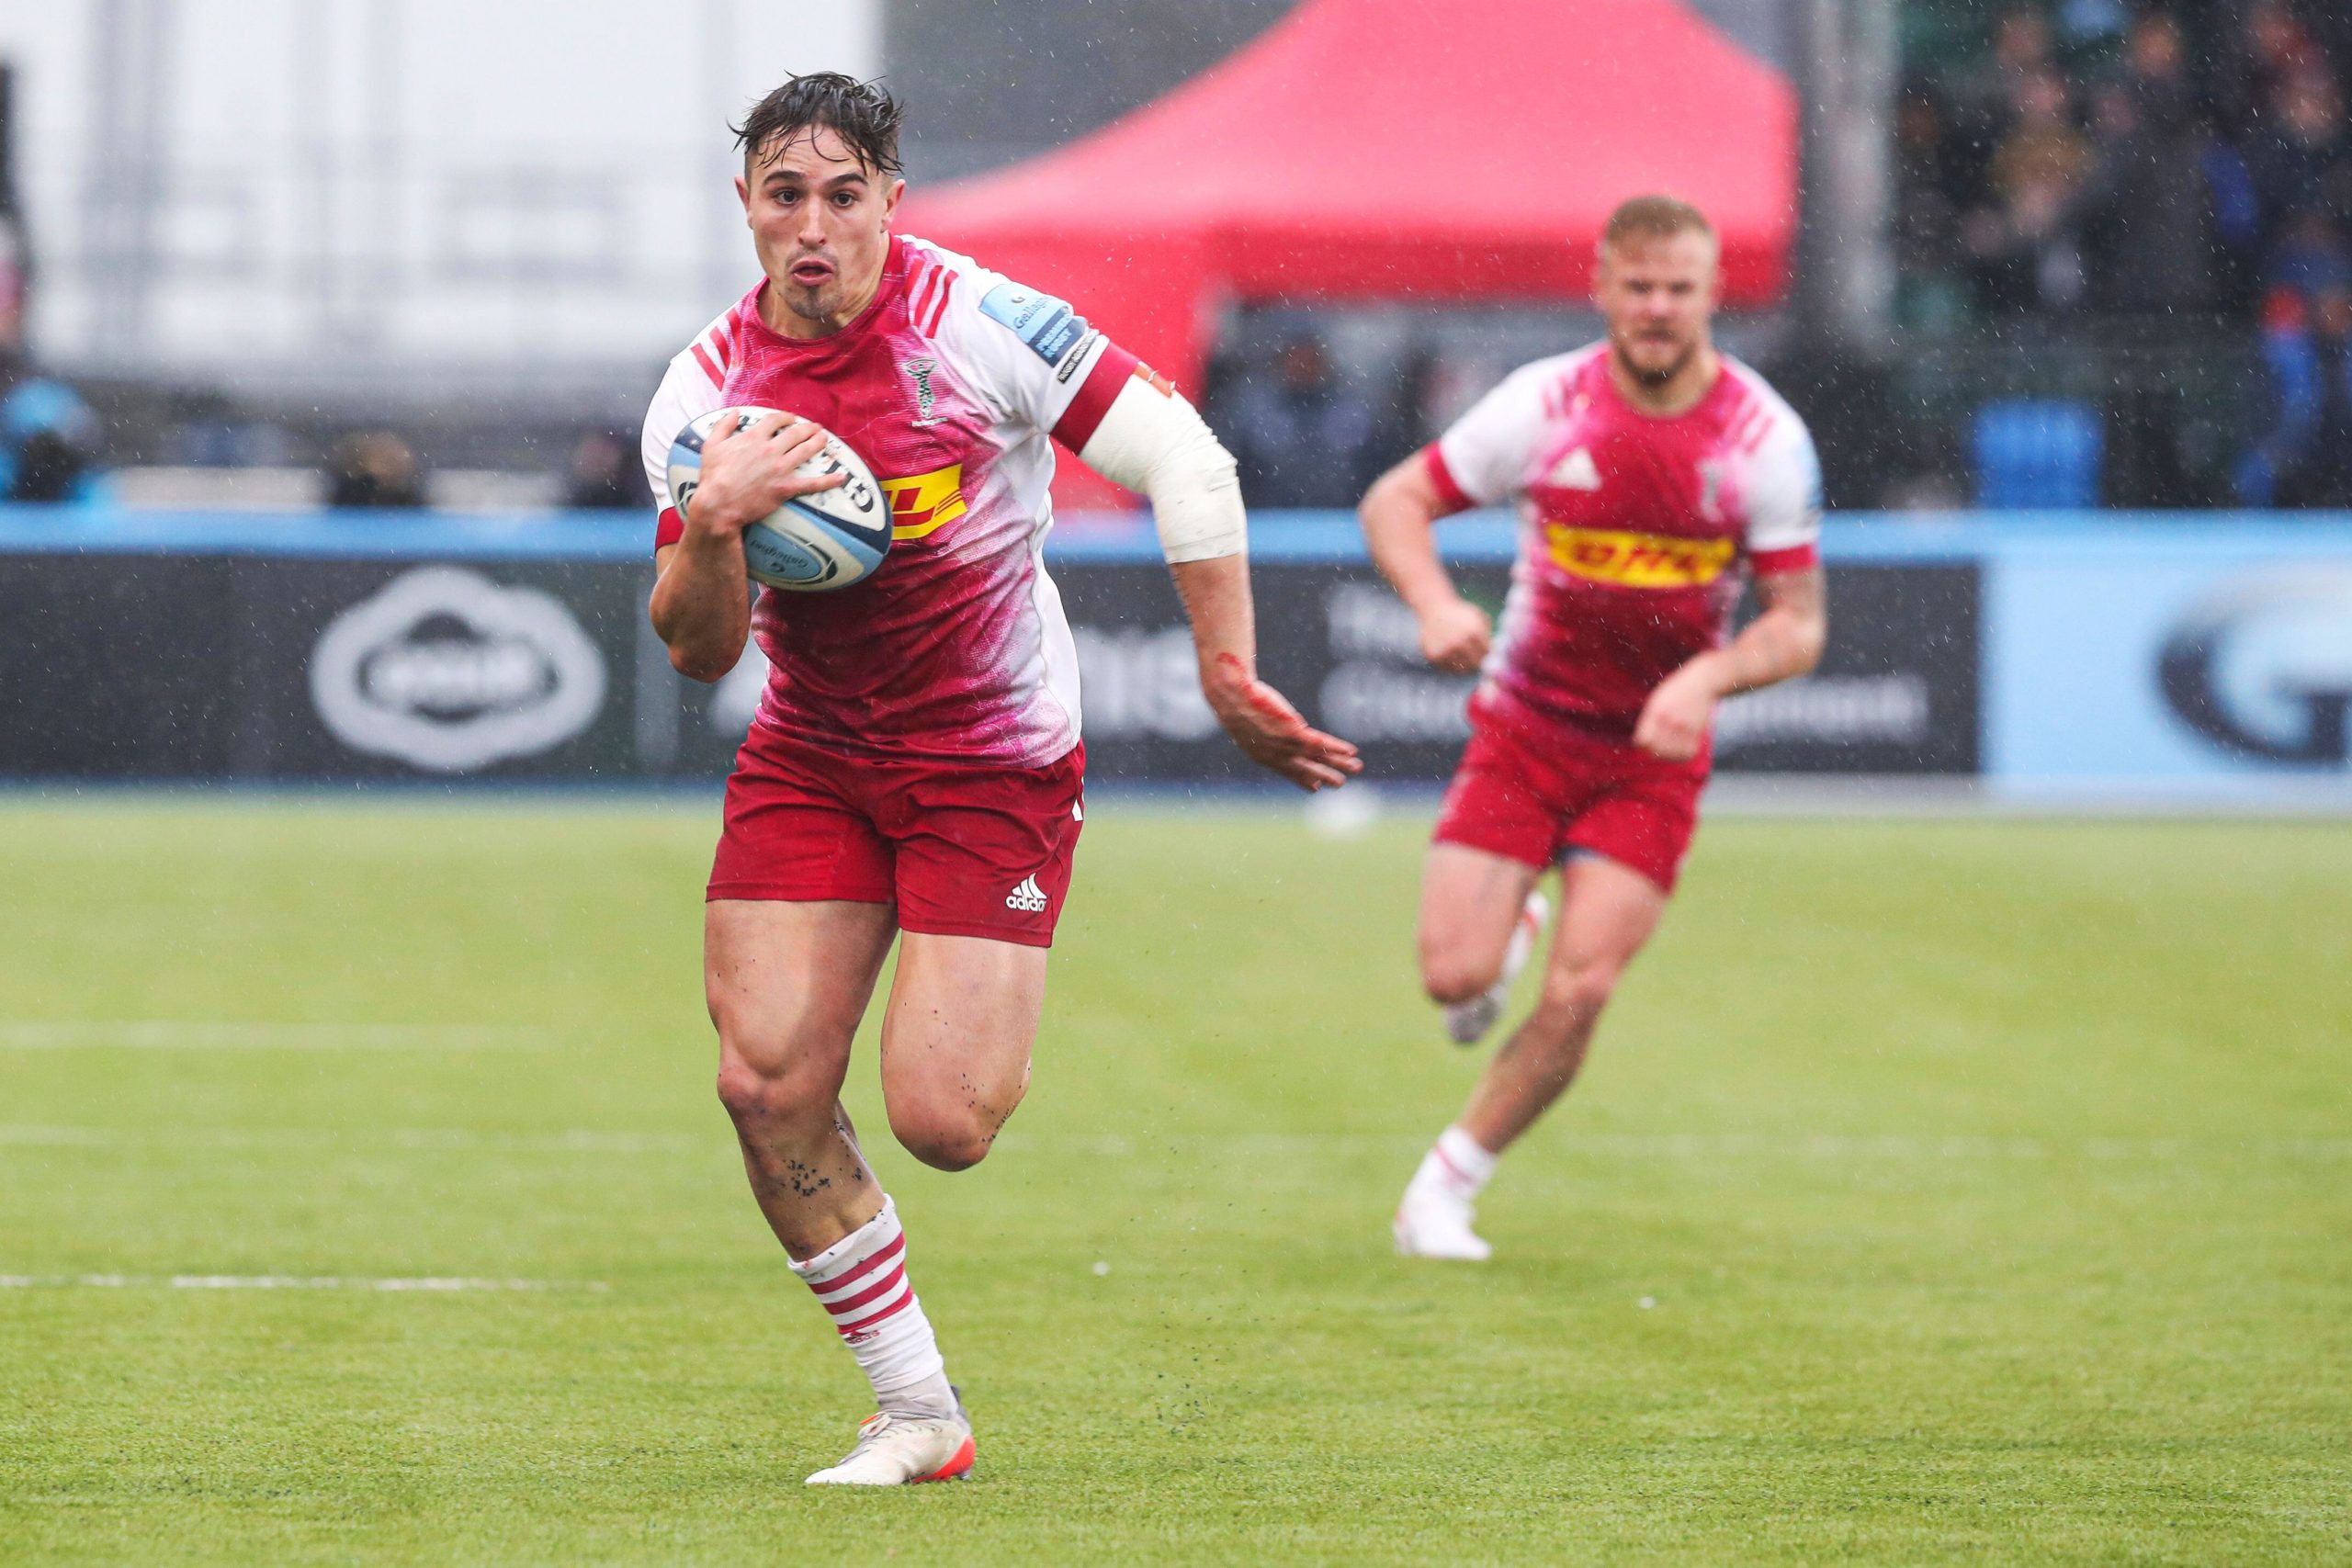 Putting Premiership rugby on free to air TV is massive, says Harlequins wing Cadan Murley